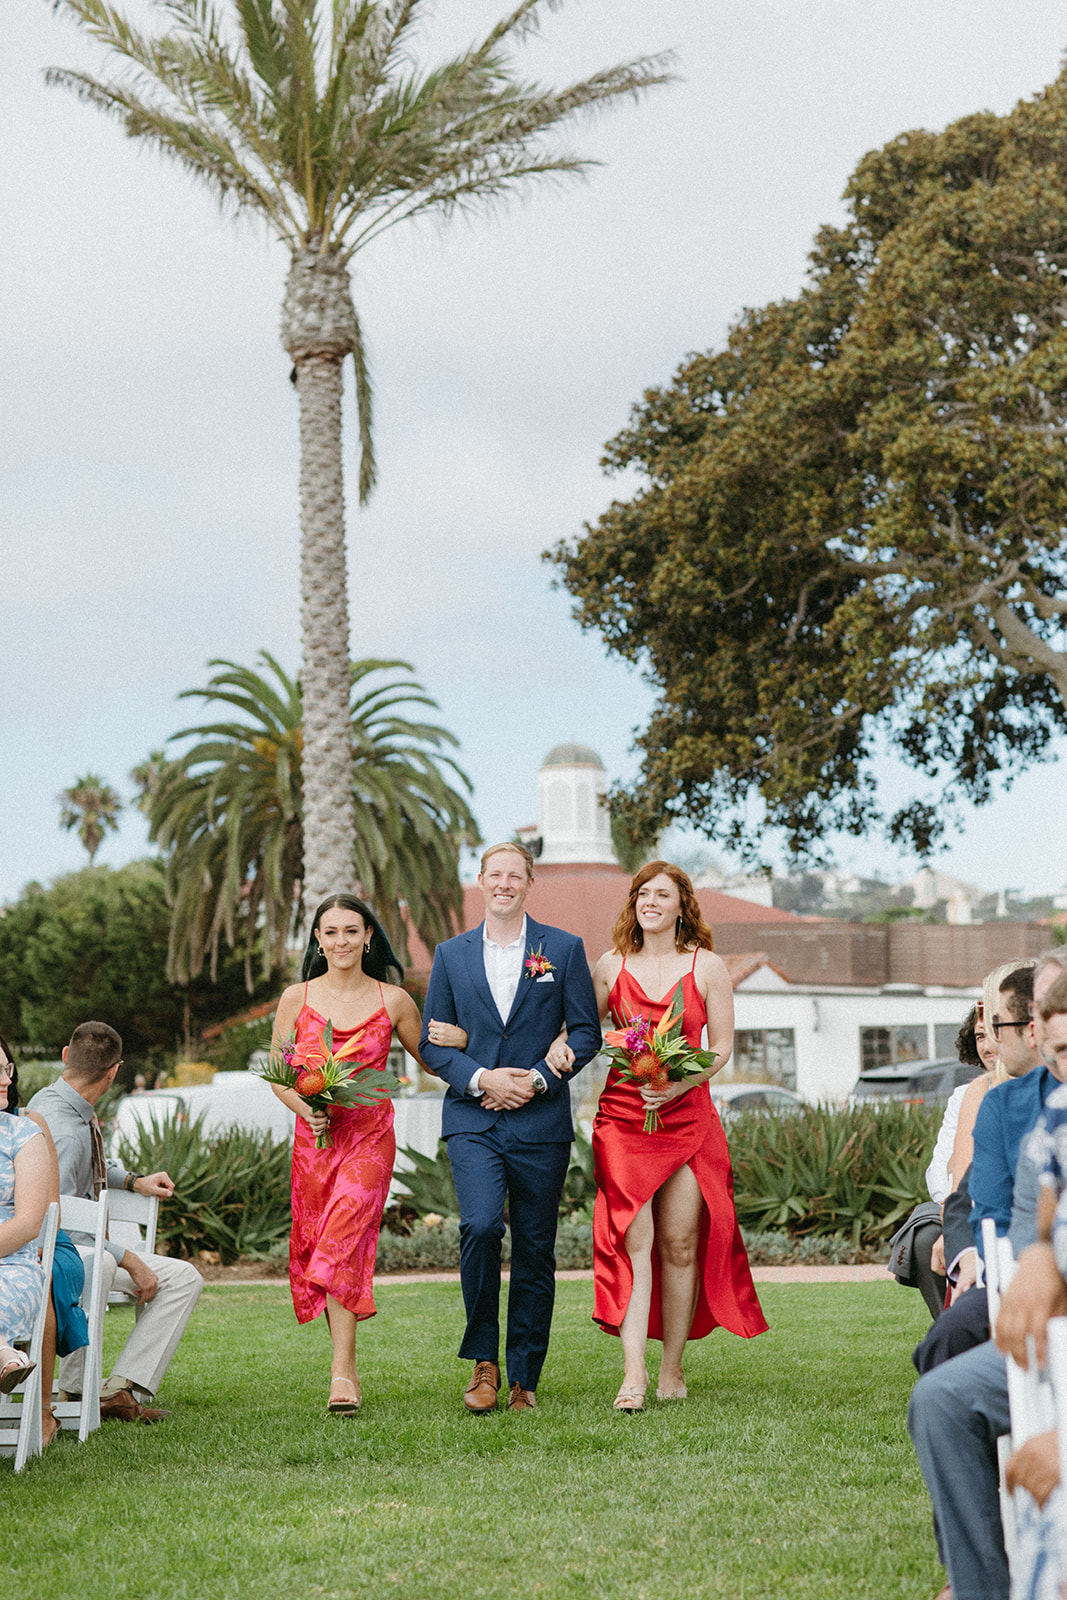 wedding party with groomsman in blue suit and bridesmaids in bright pink dresses with tropical bouquets walk down aisle